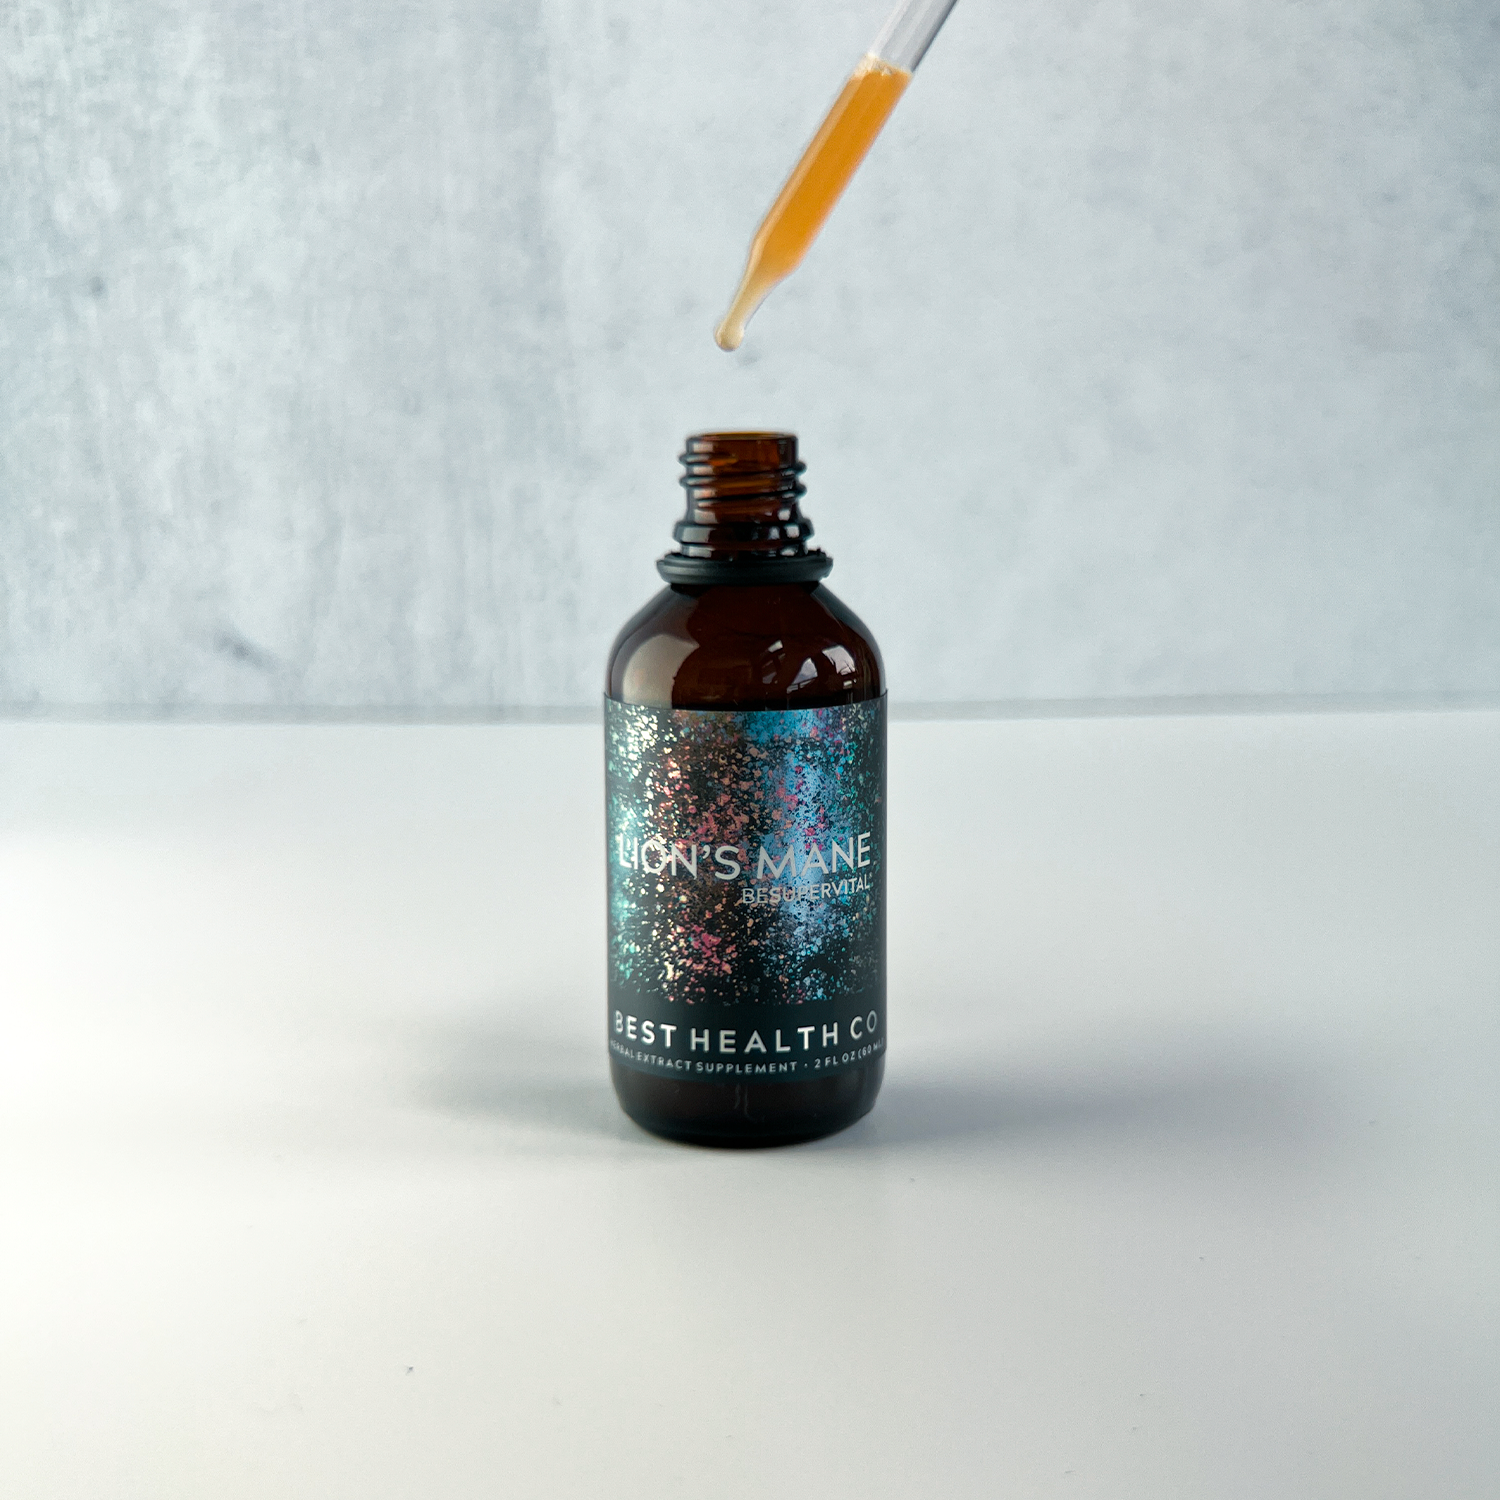 LION'S MANE mushroom extract with dropper from Best Health Co.